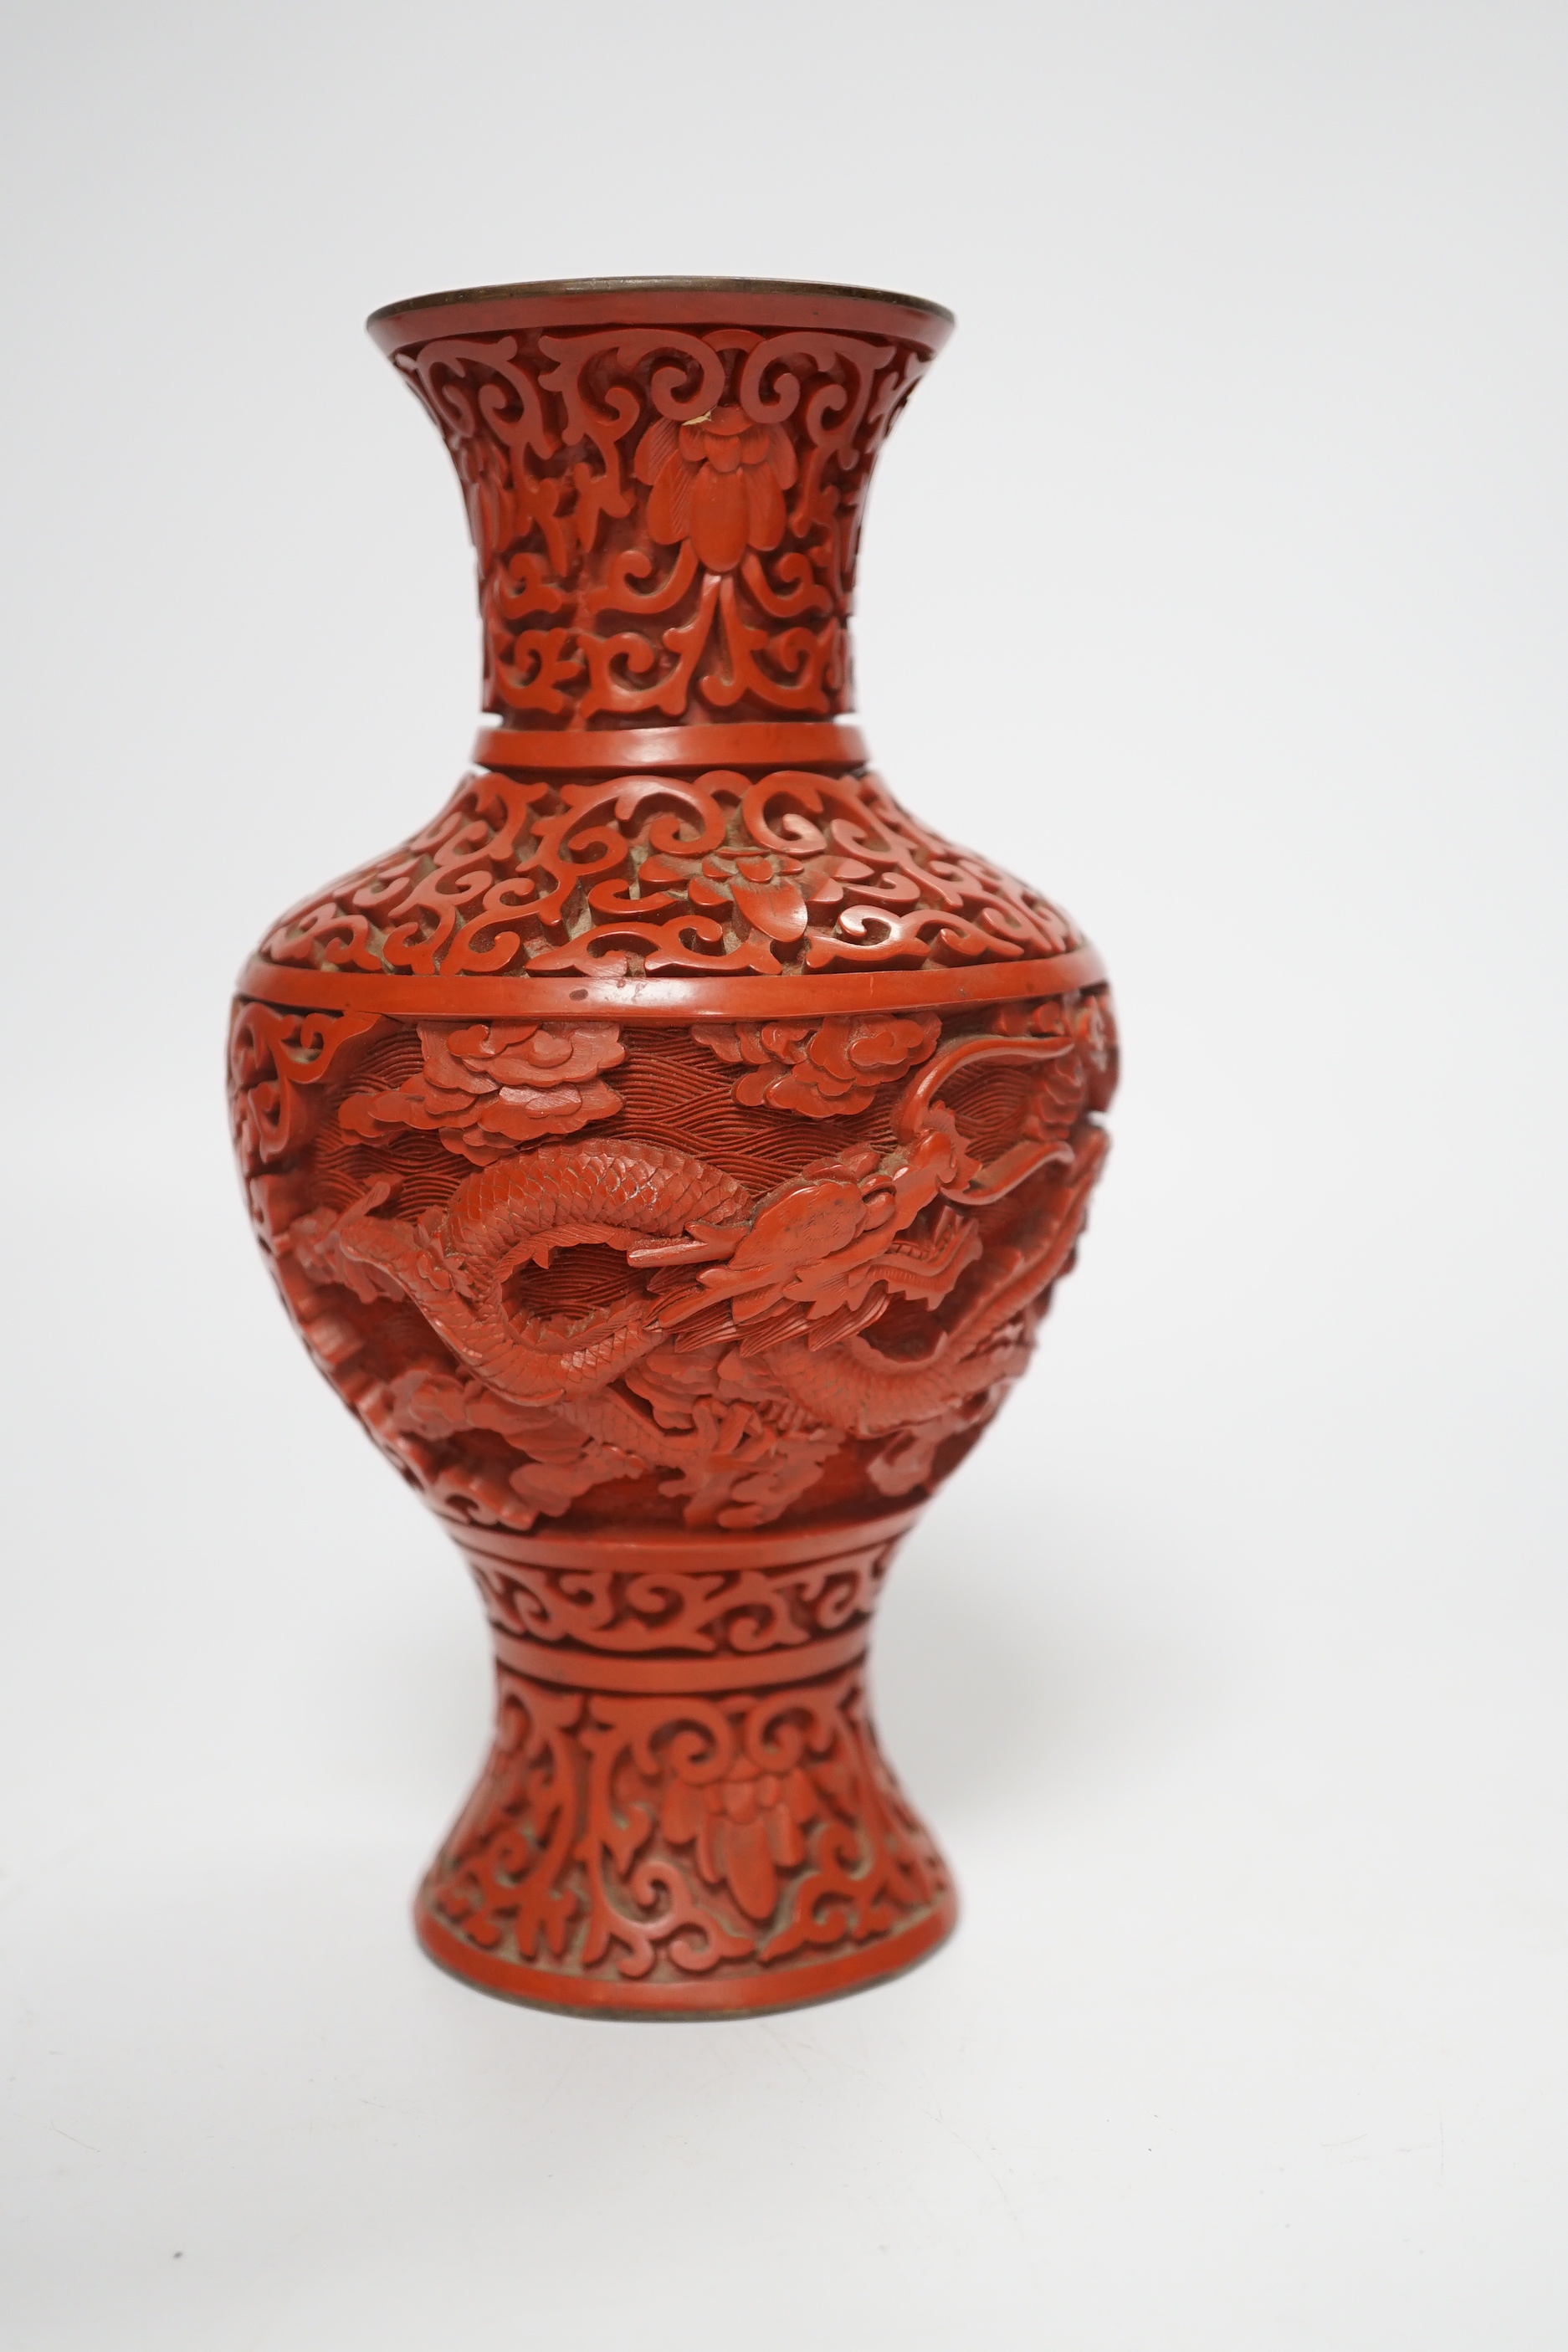 Three Chinese cinnabar lacquer items, a vase, an ashtray and a lidded box, vase 16.5cm - Image 10 of 10